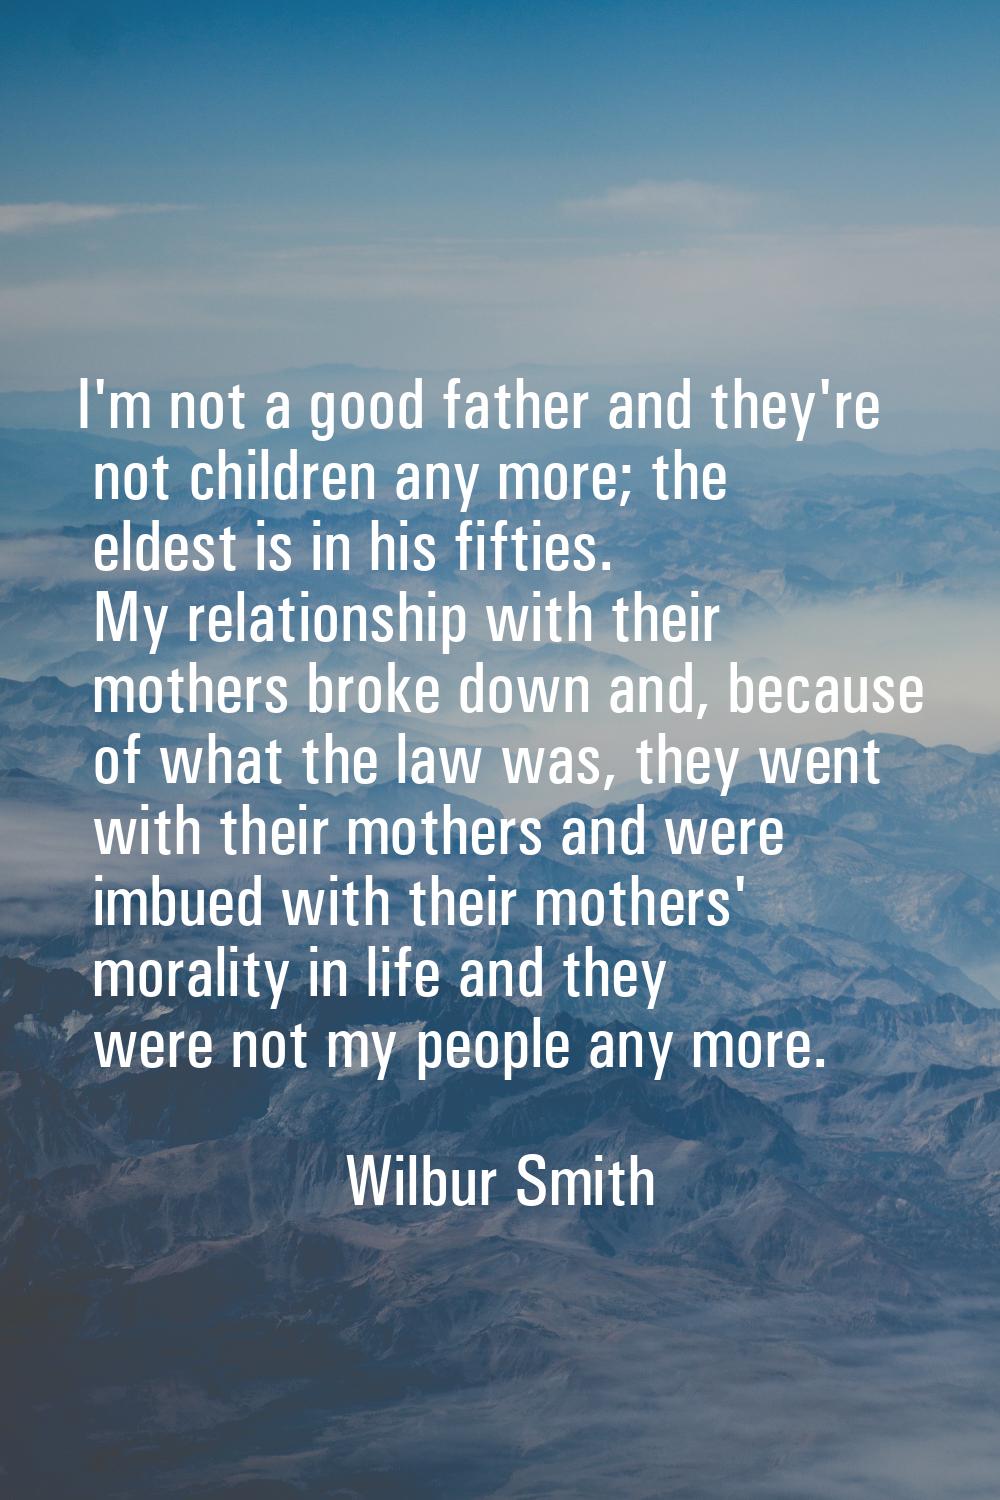 I'm not a good father and they're not children any more; the eldest is in his fifties. My relations